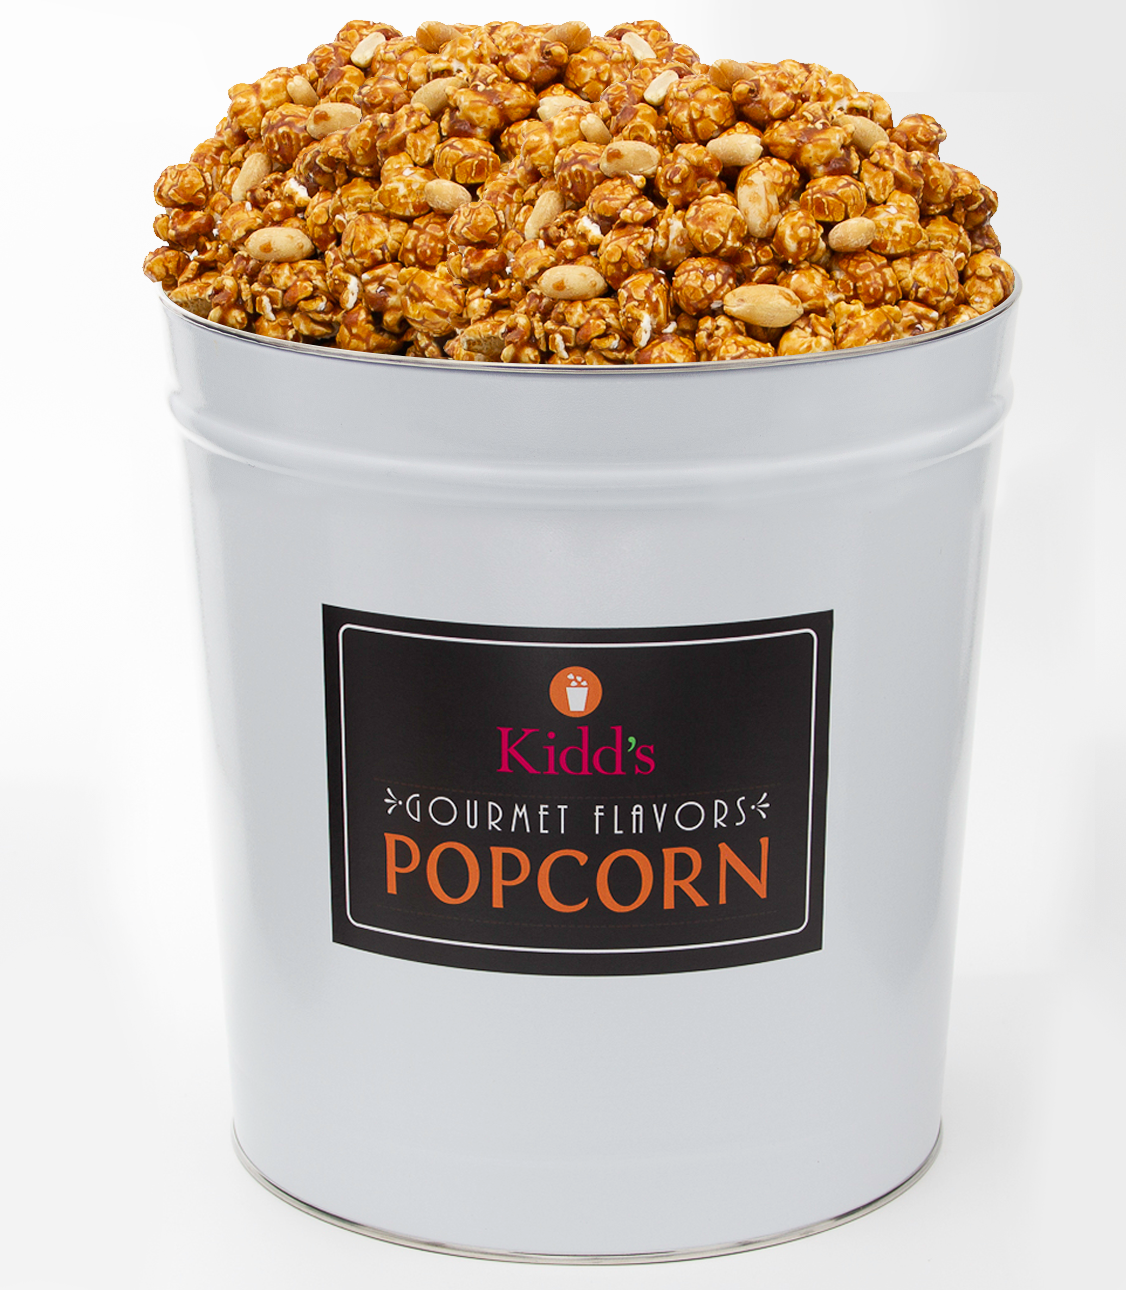 Kidd's Pop Shop Popcorn Brand large white gift tin is filled with 58 cups of Cracker Jacks style popcorn. Our award winning Caramel Popcorn with nuts is the perfect salty and sweet snack.